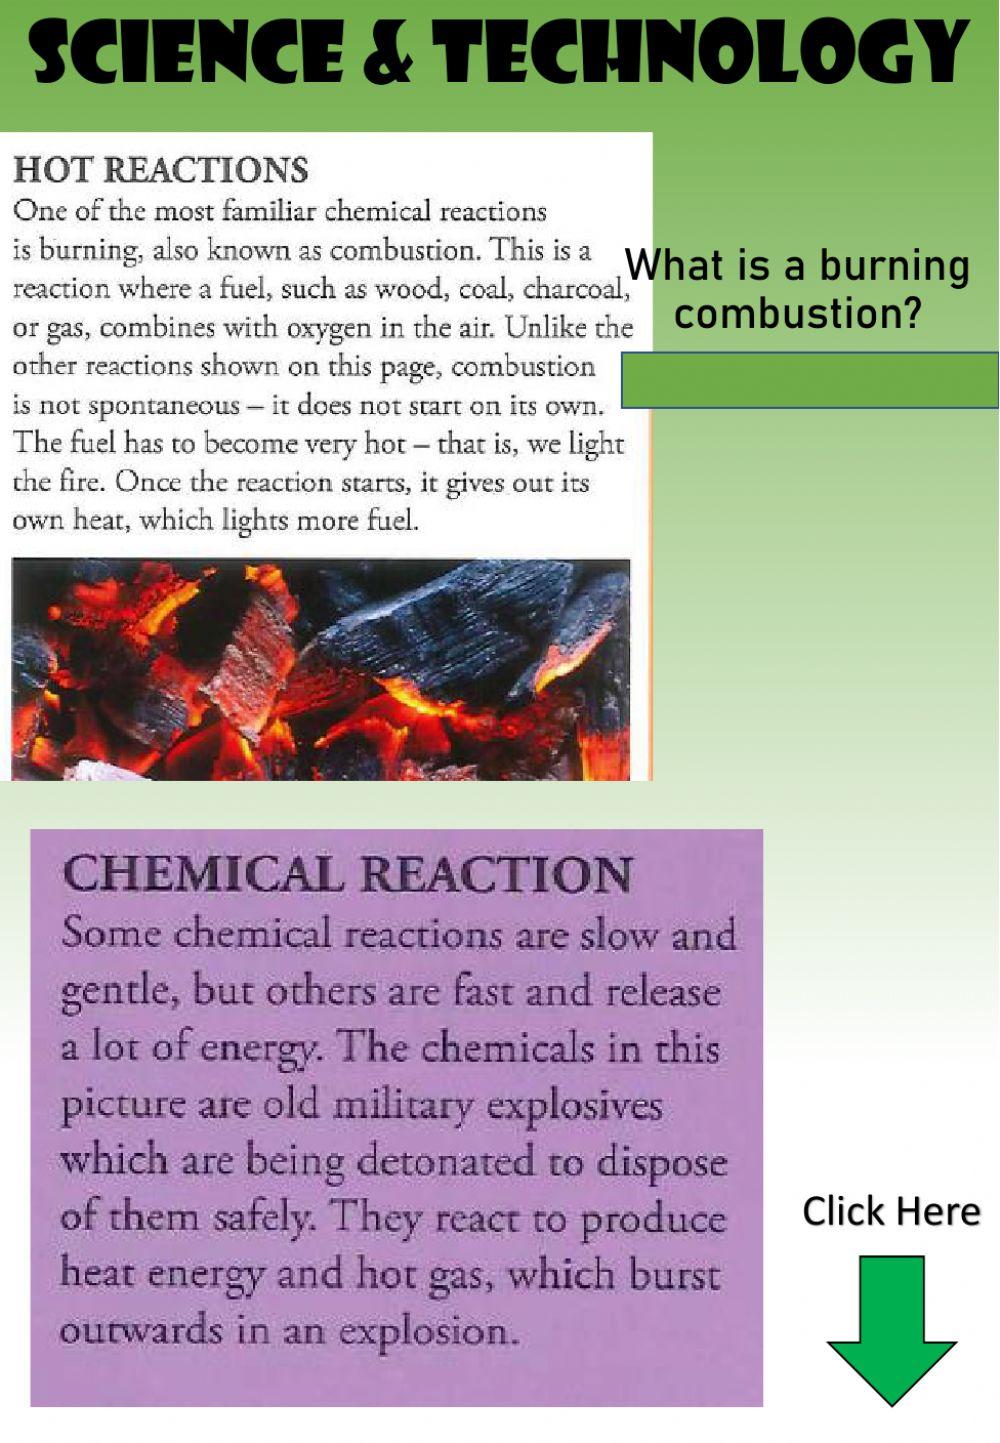 WEEK 19: THURSDAY: Chemical Reactions